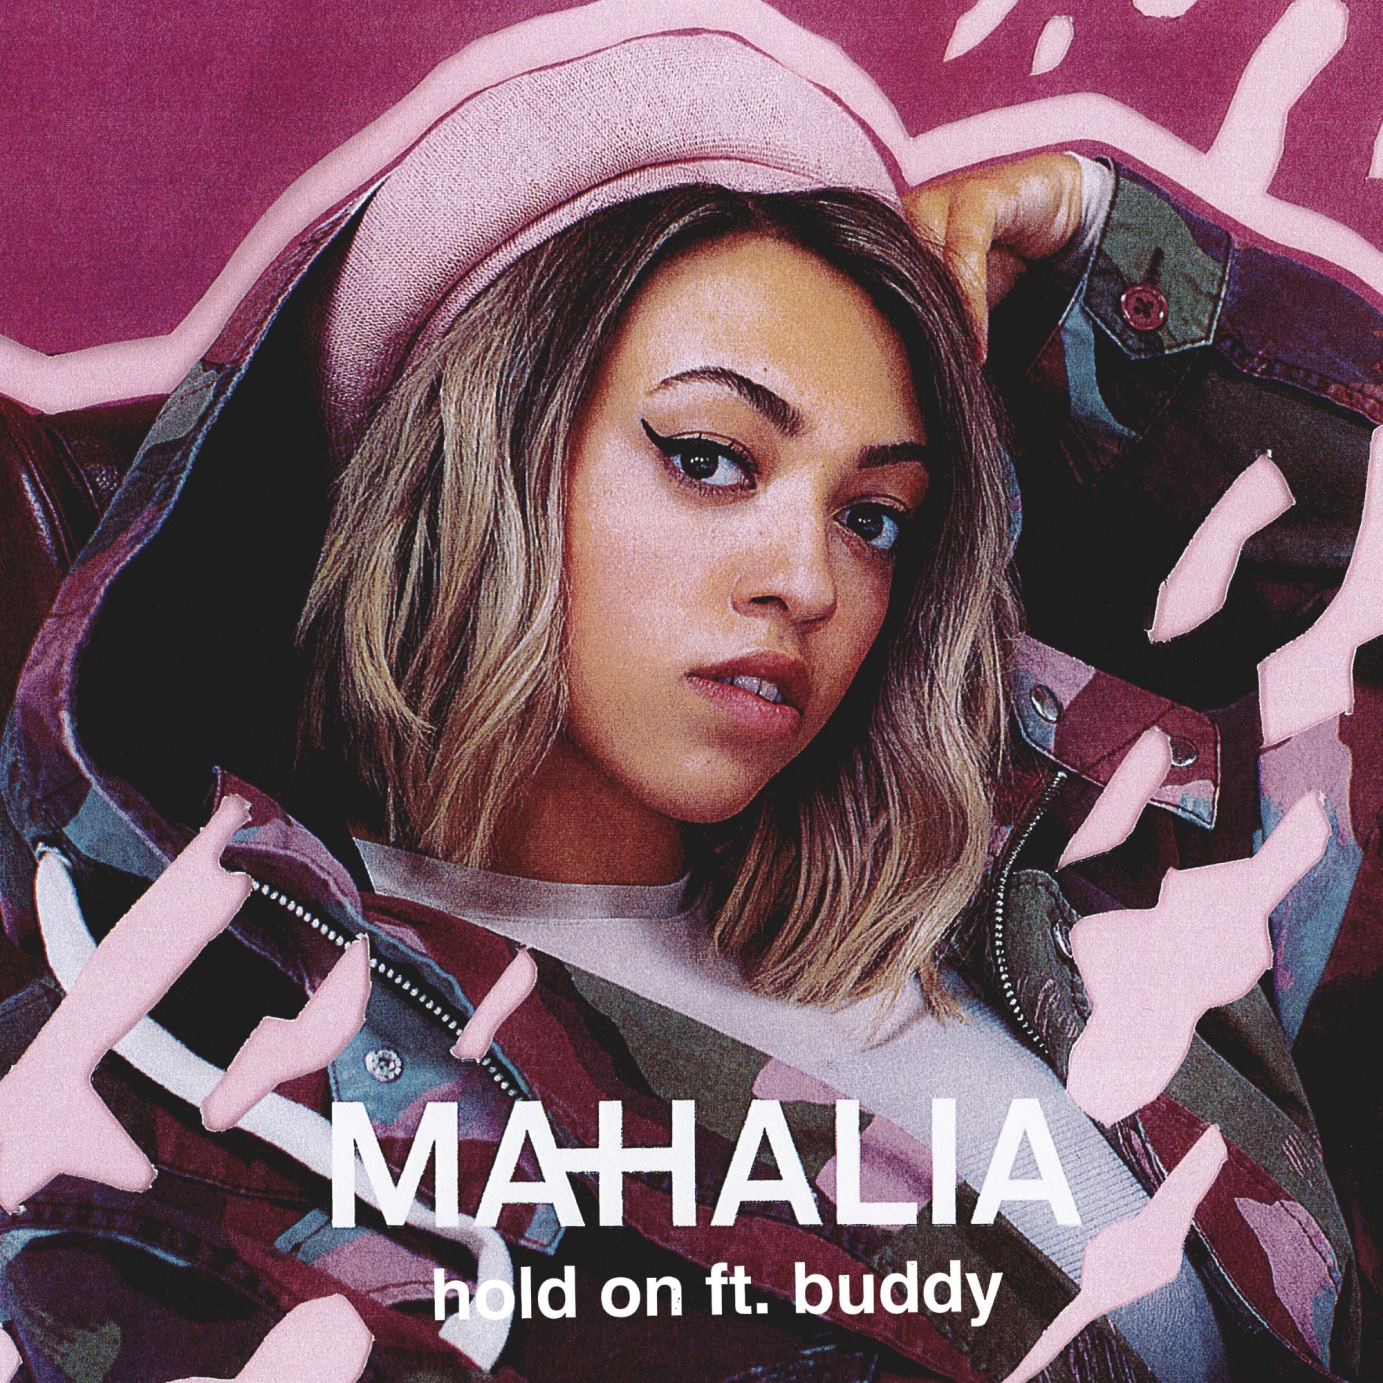 Graphic design for Mahalia by cottoncreative